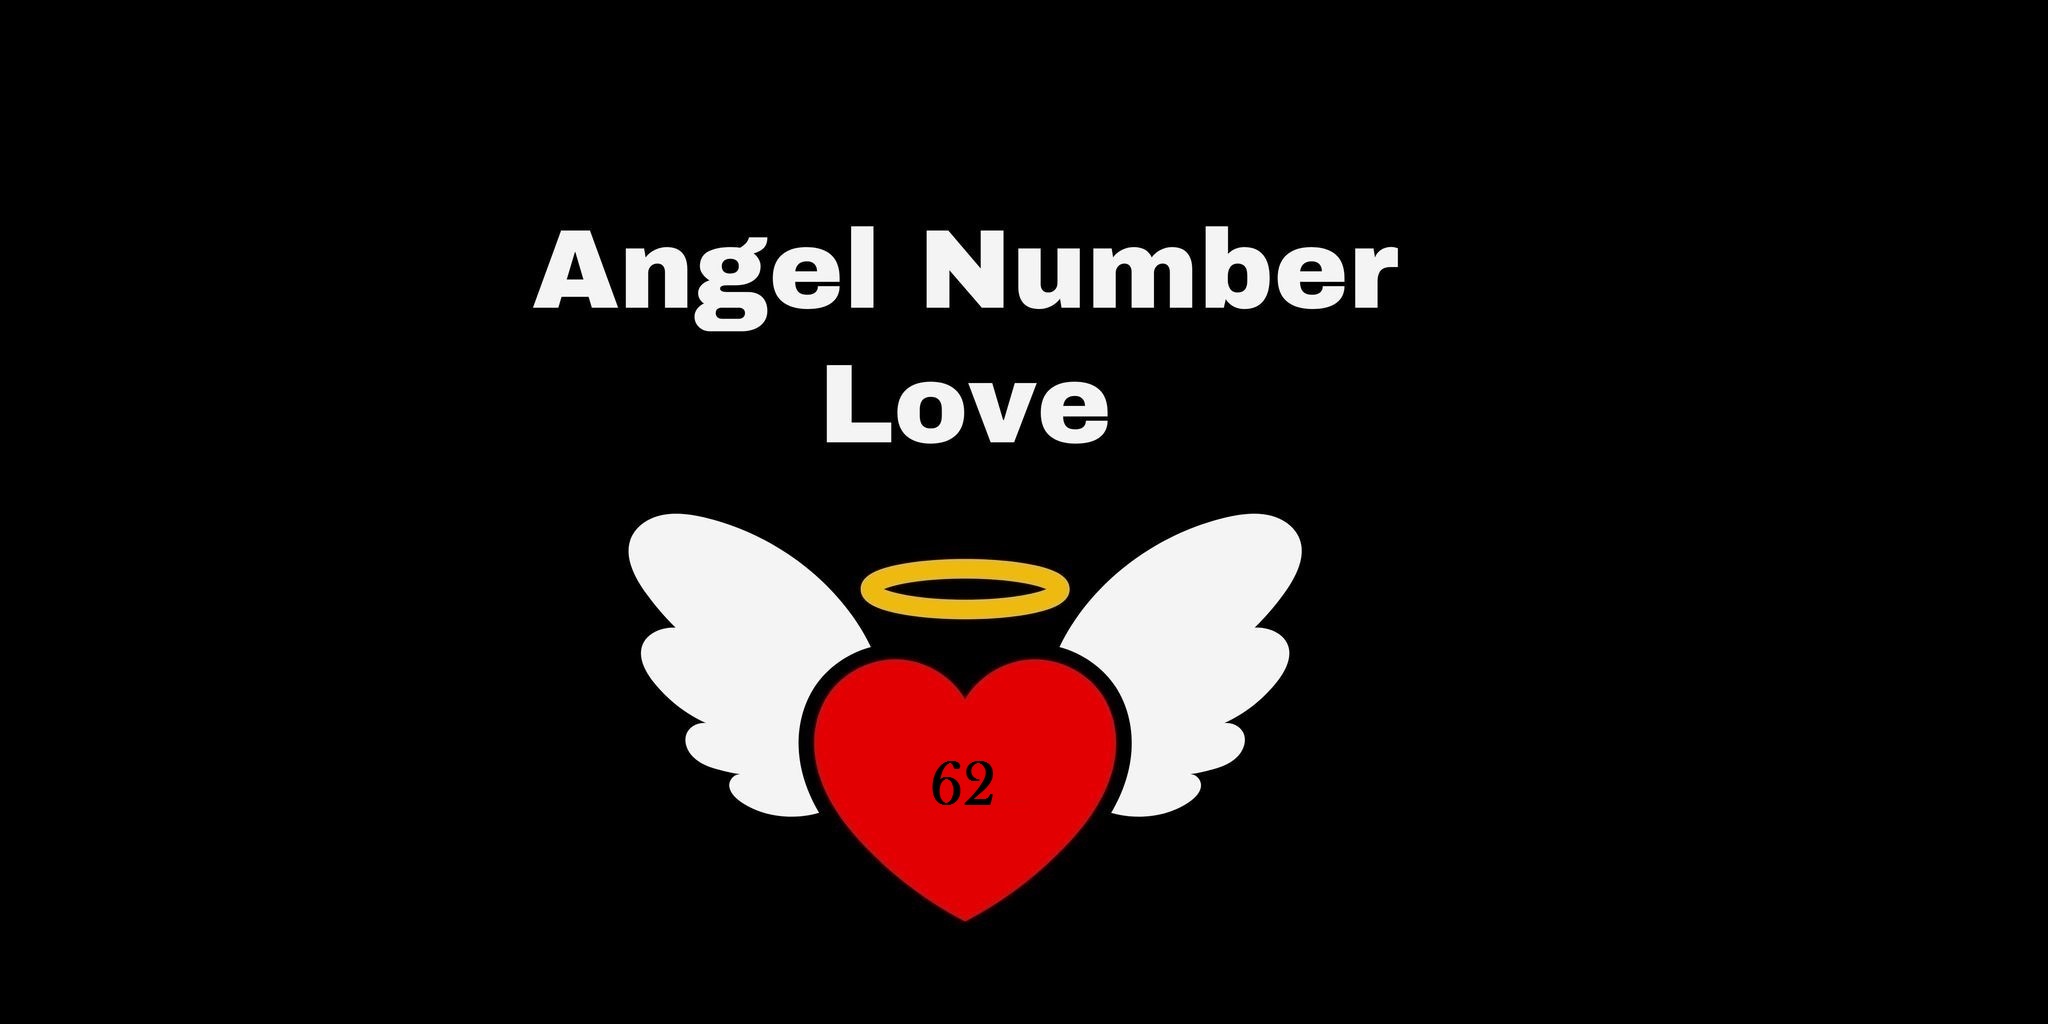 62 Angel Number Meaning In Love